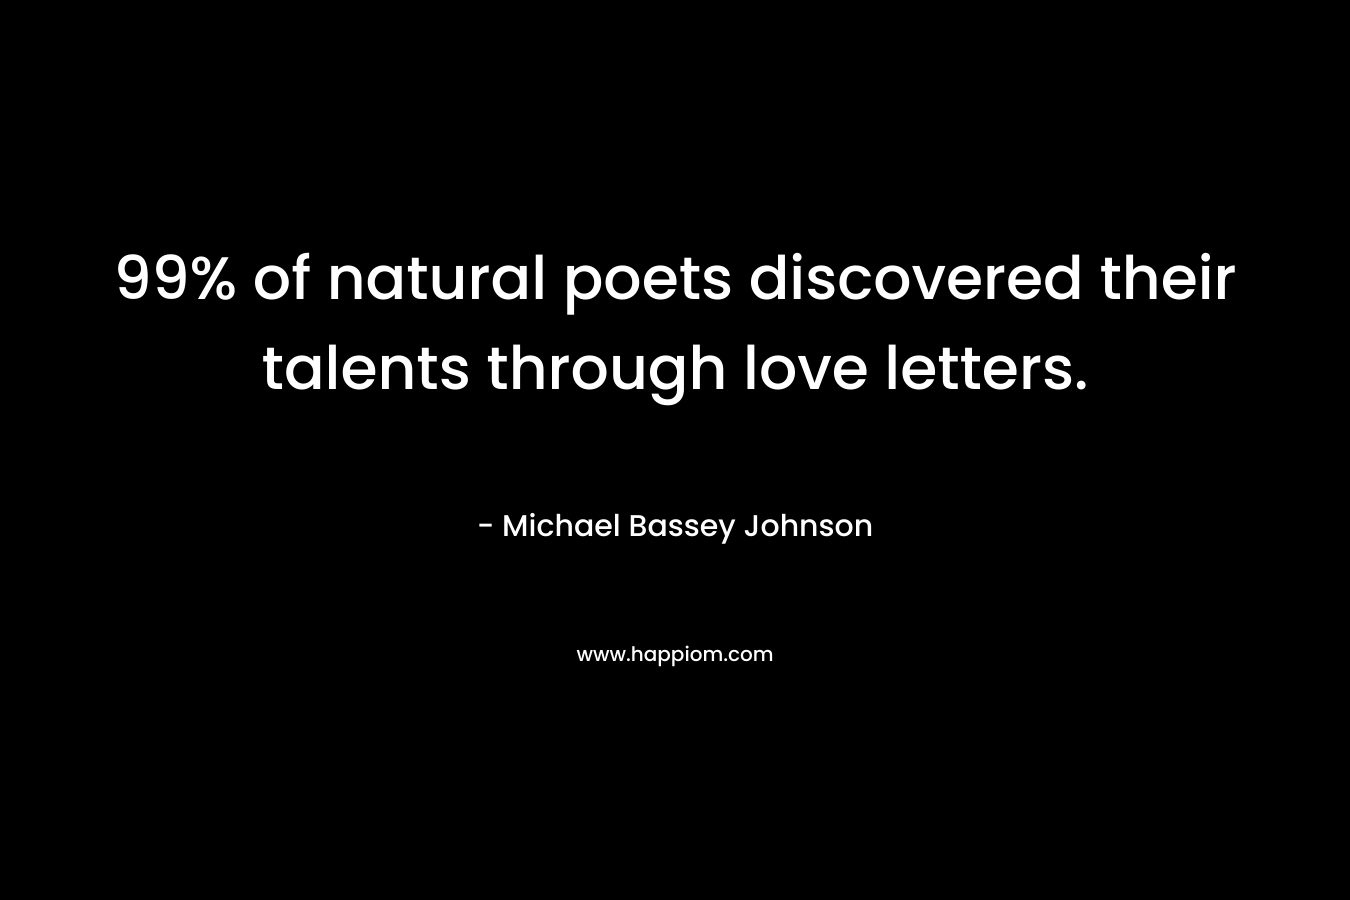 99% of natural poets discovered their talents through love letters.